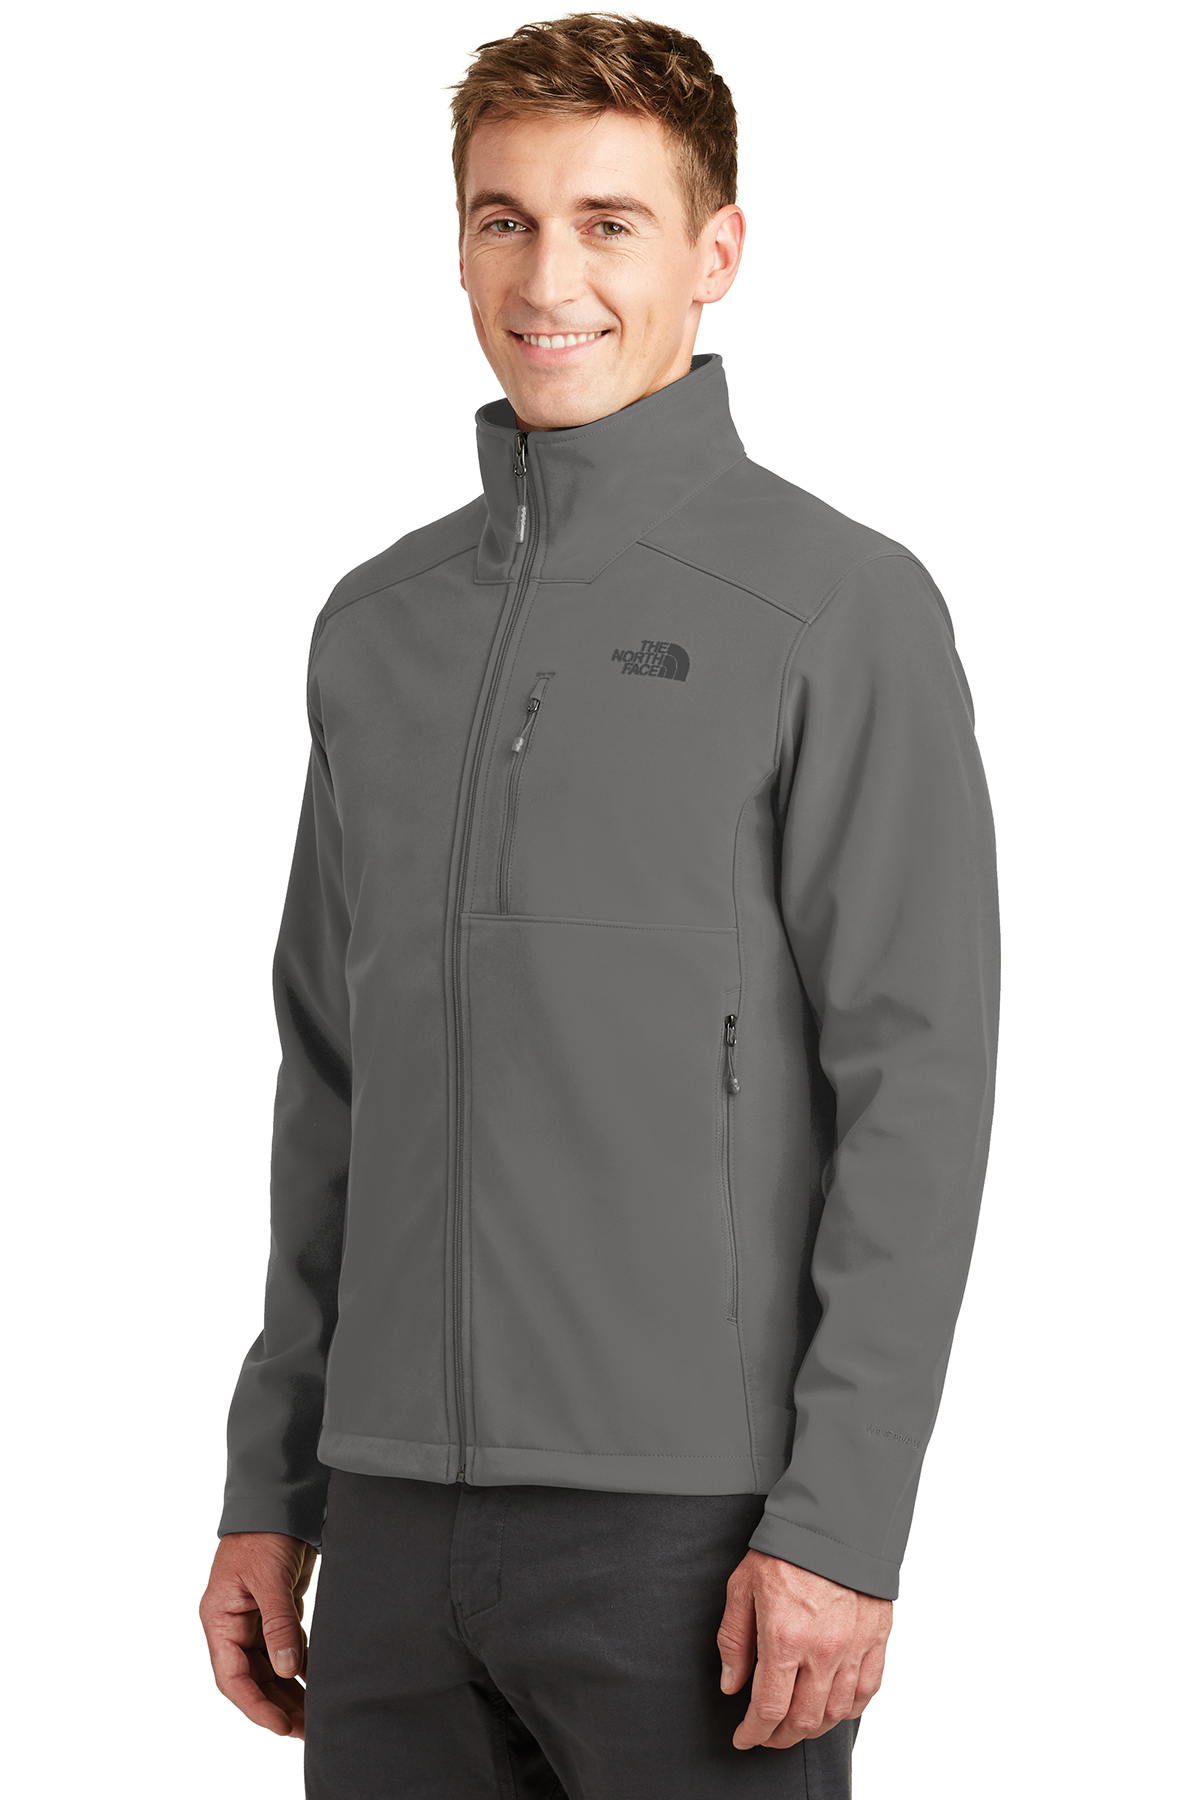 The North Face ® Apex Barrier Soft Shell Jacket | Product | SanMar